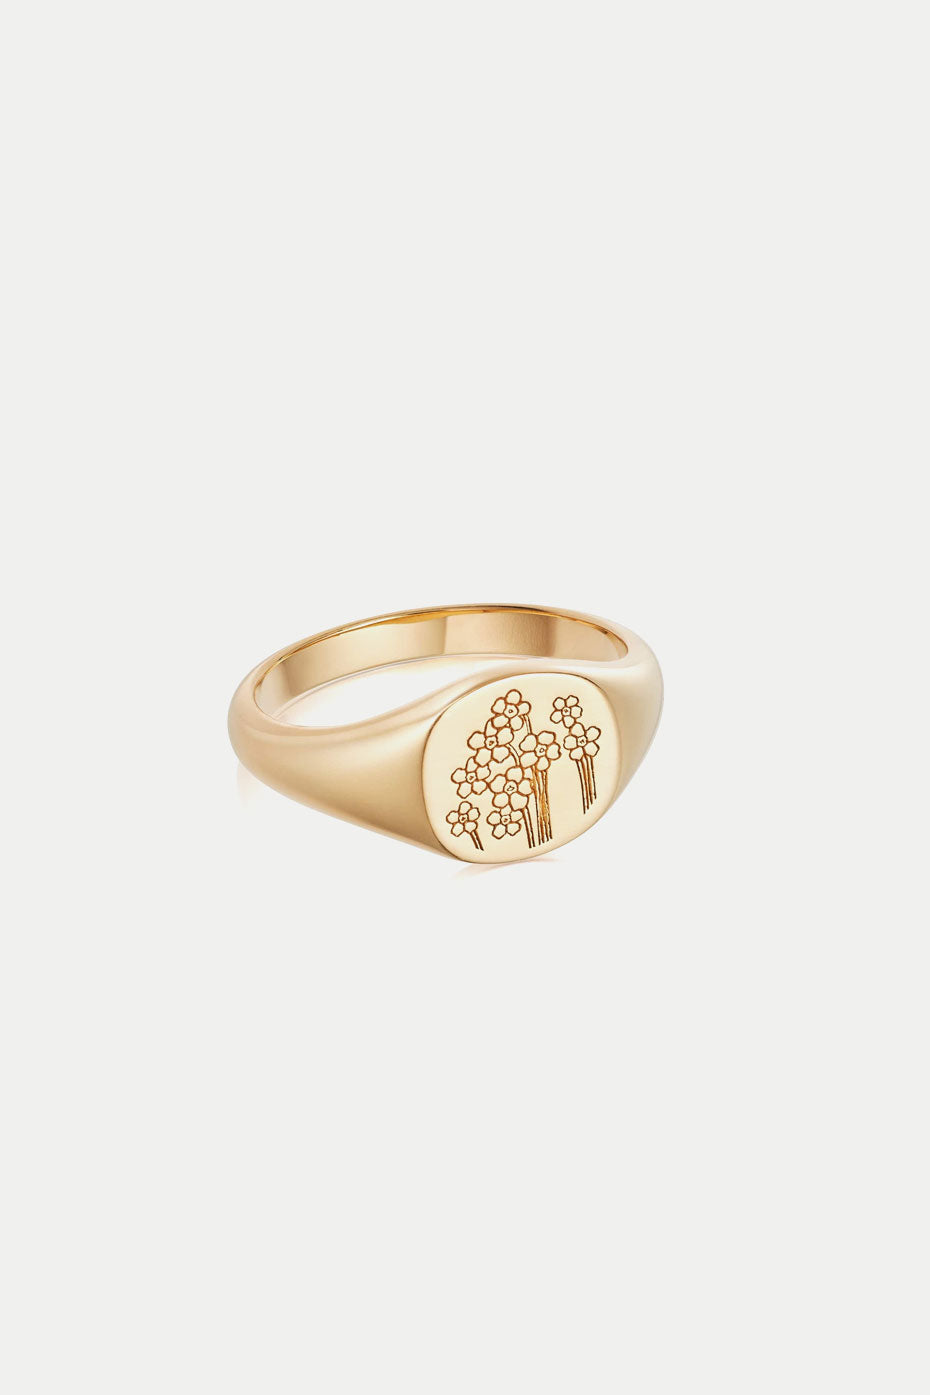 daisy-london-gold-forget-me-not-signet-ring